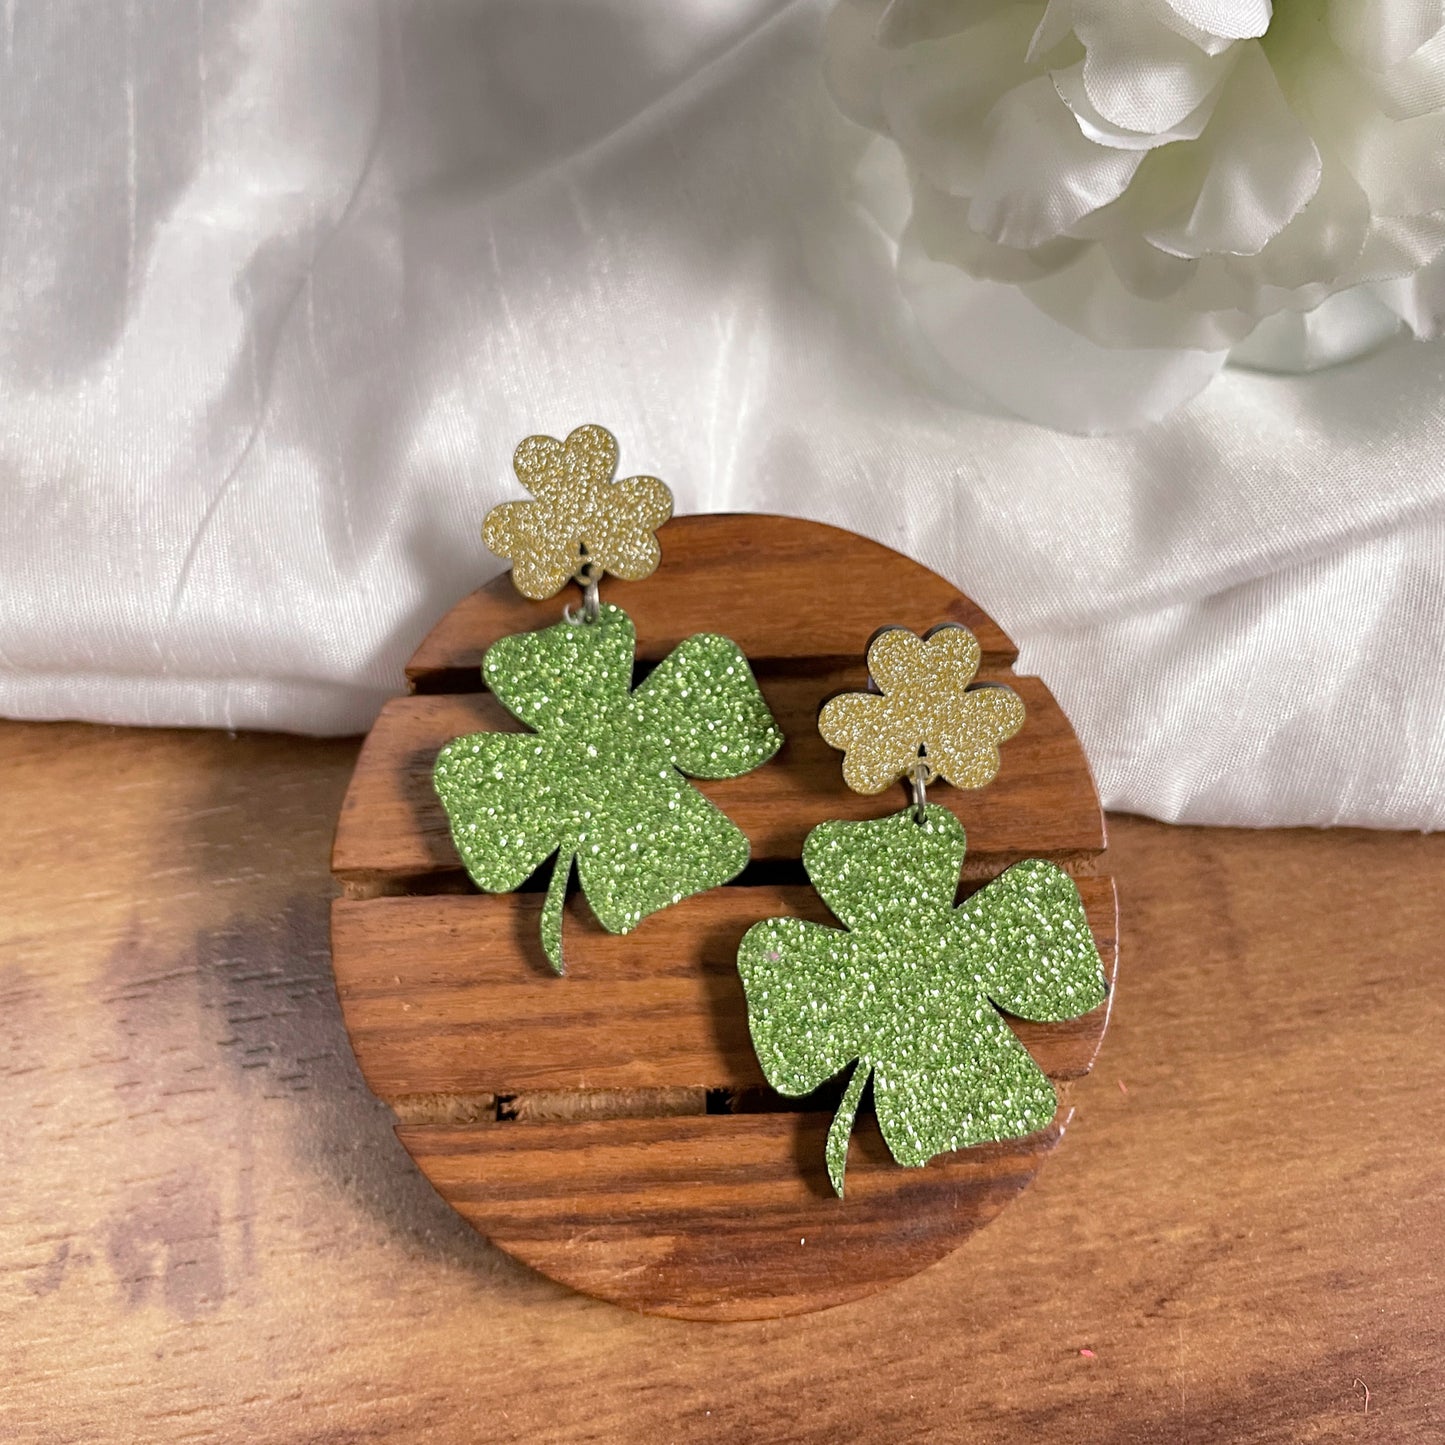 Clover Earrings - Green and Golden - Nian by Nidhi - in a white and brown background